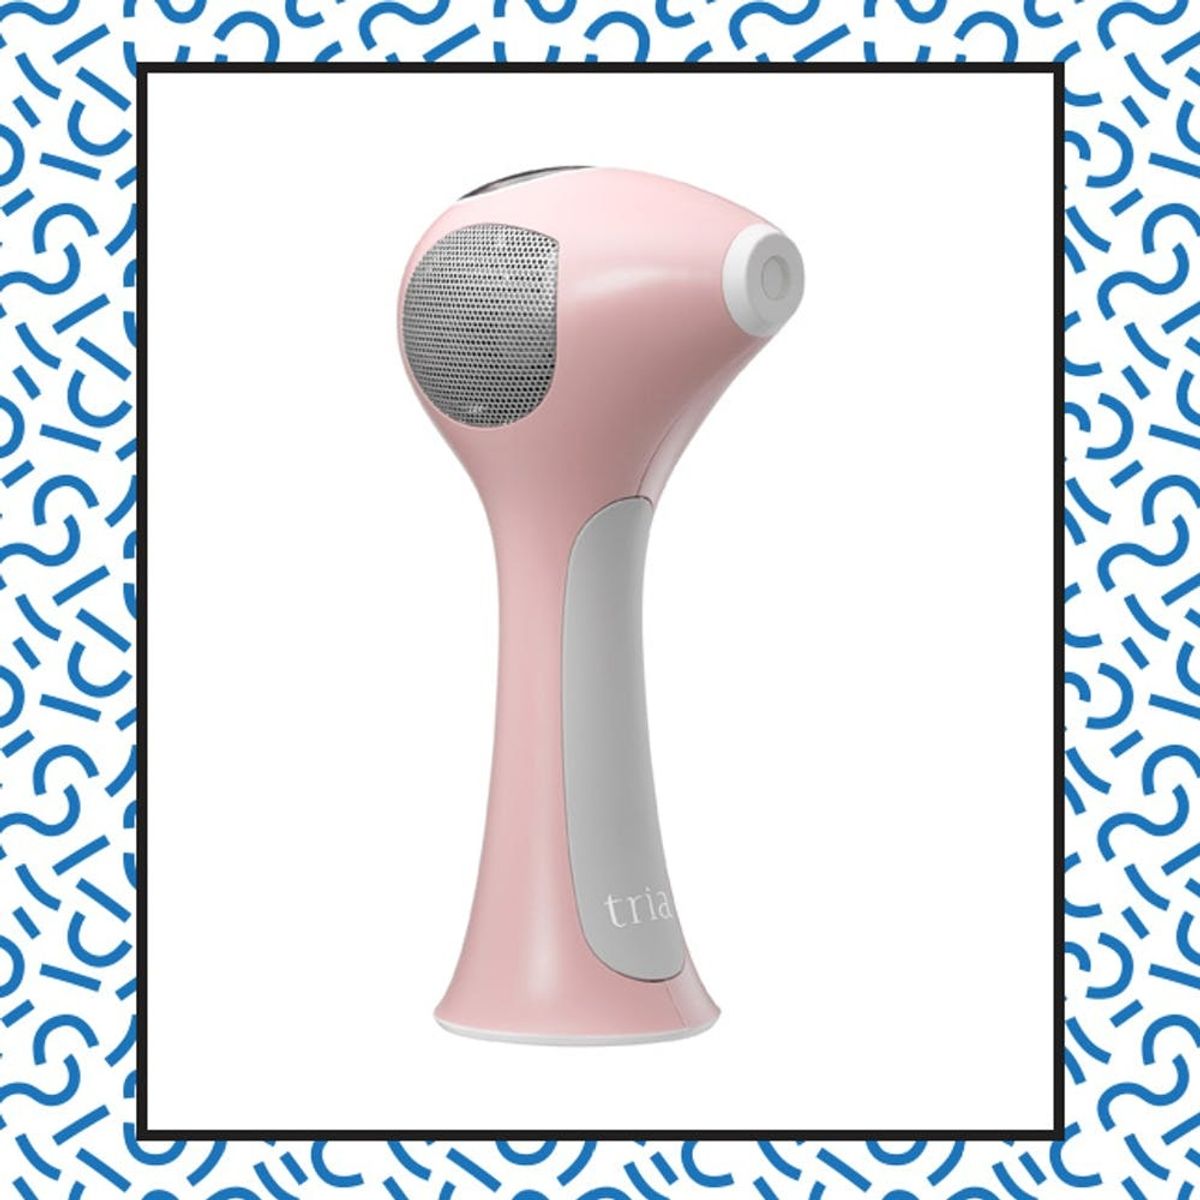 9 At-Home Hair Removal Products That *Seriously* Work